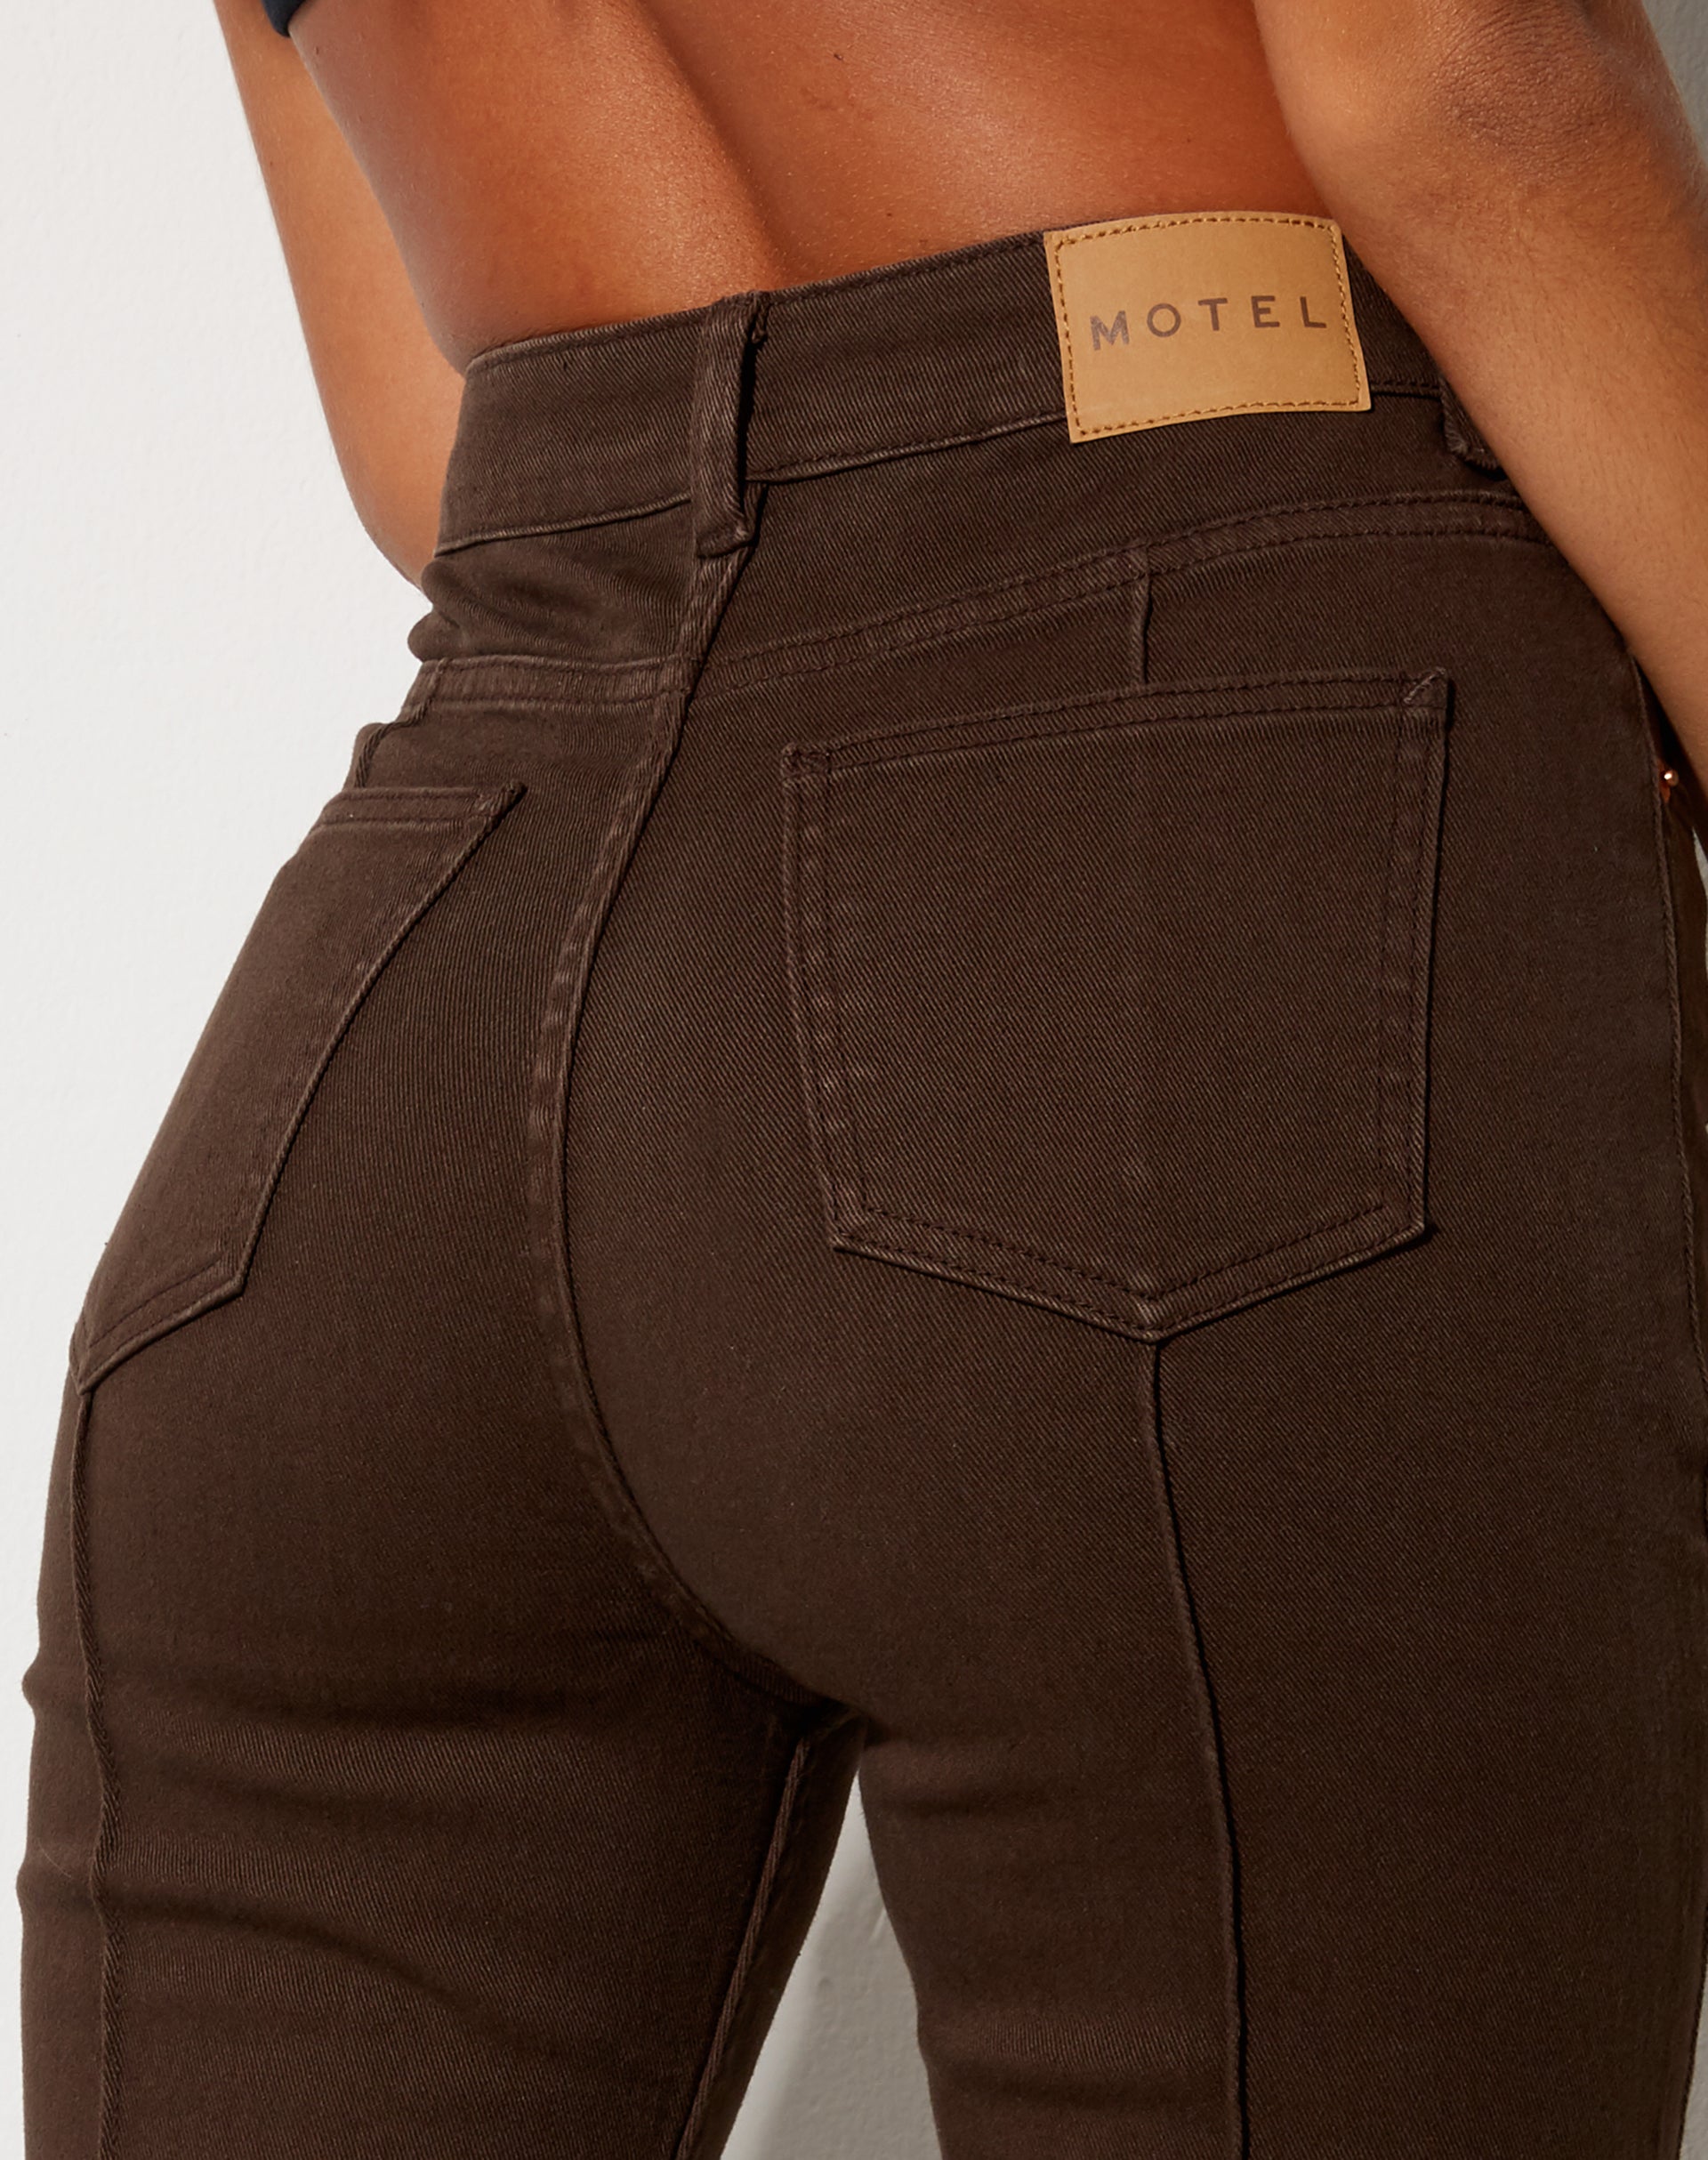 Image of Seam Bootleg Jeans in Bitter Chocolate